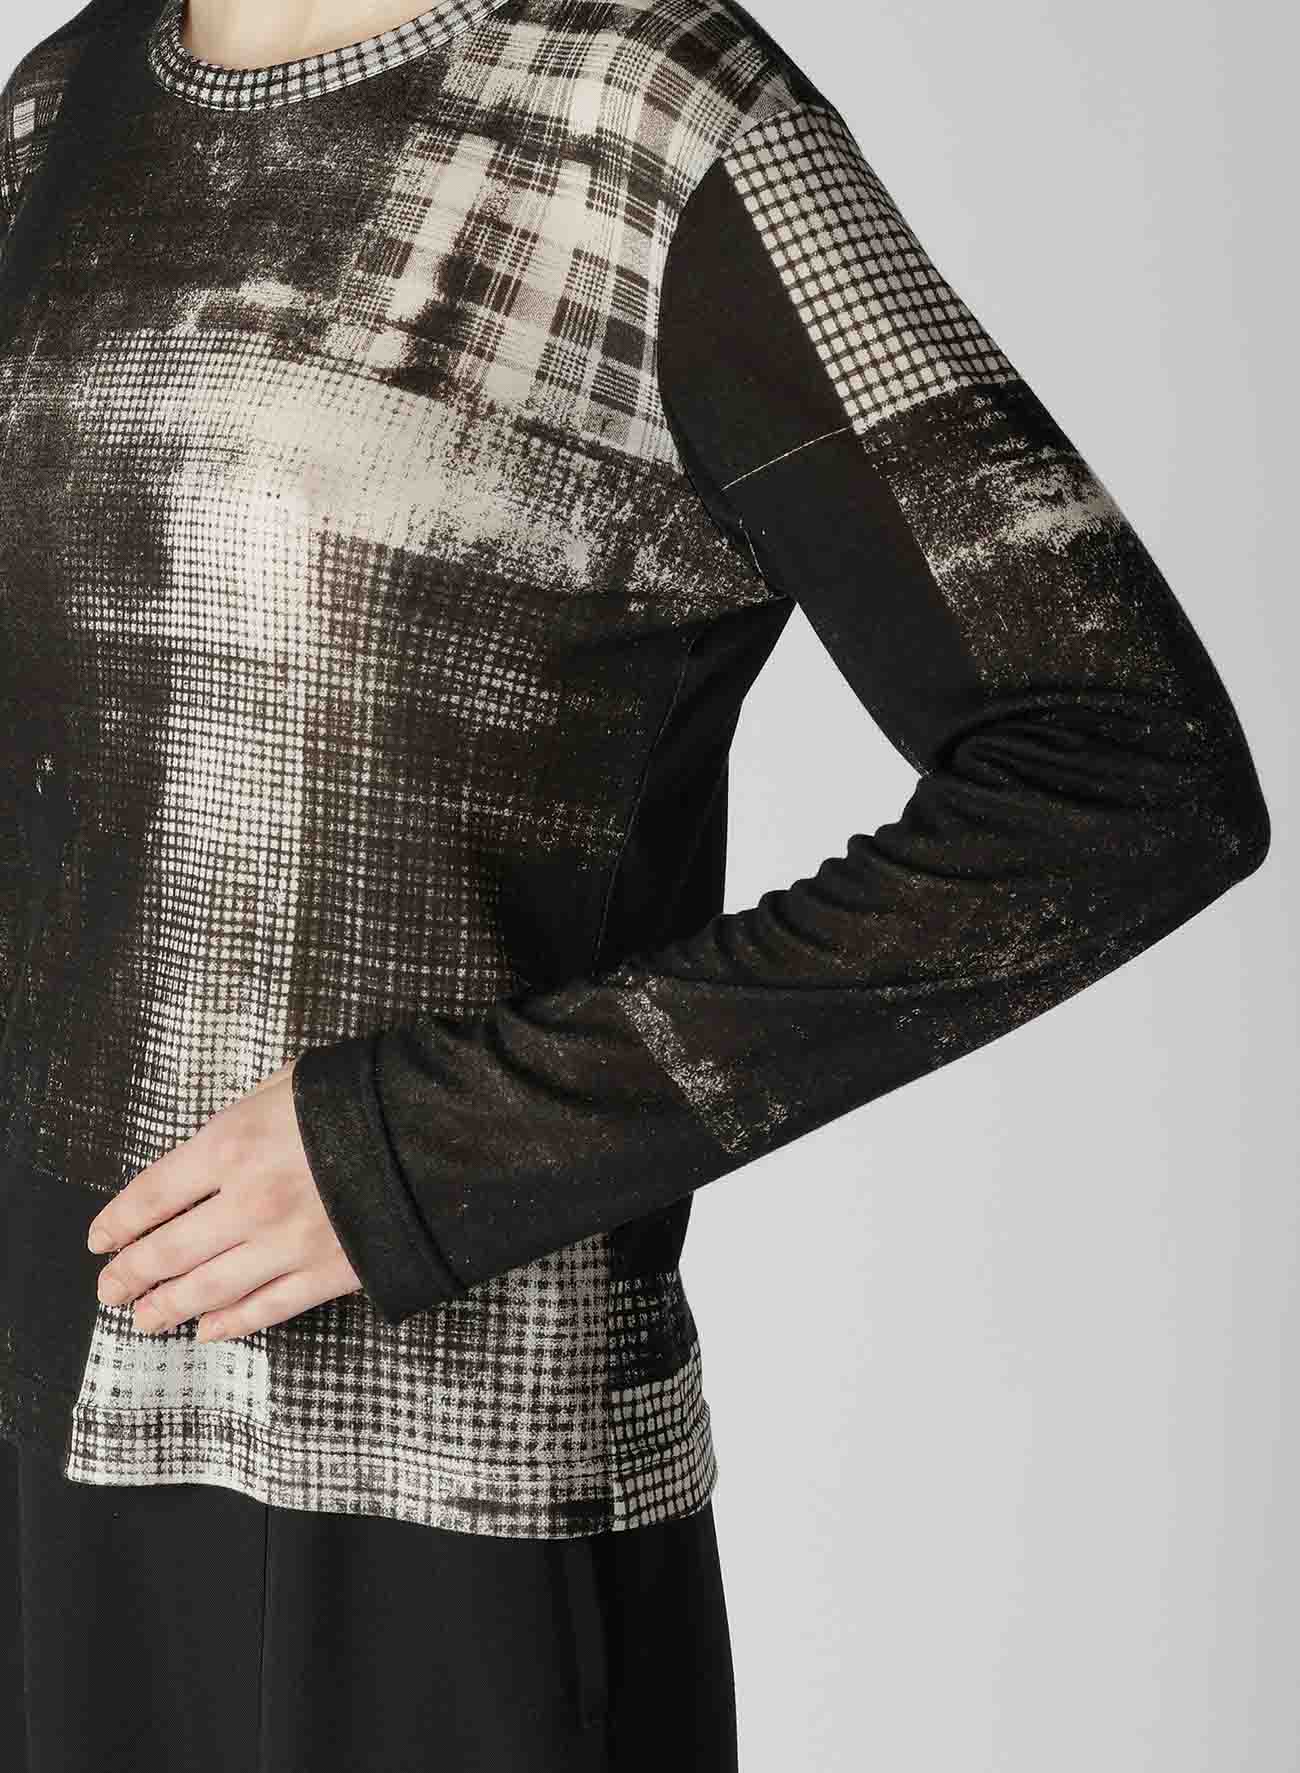 CHECKED PRINT ROUND NECK LONG SLEEVE T-SHIRT